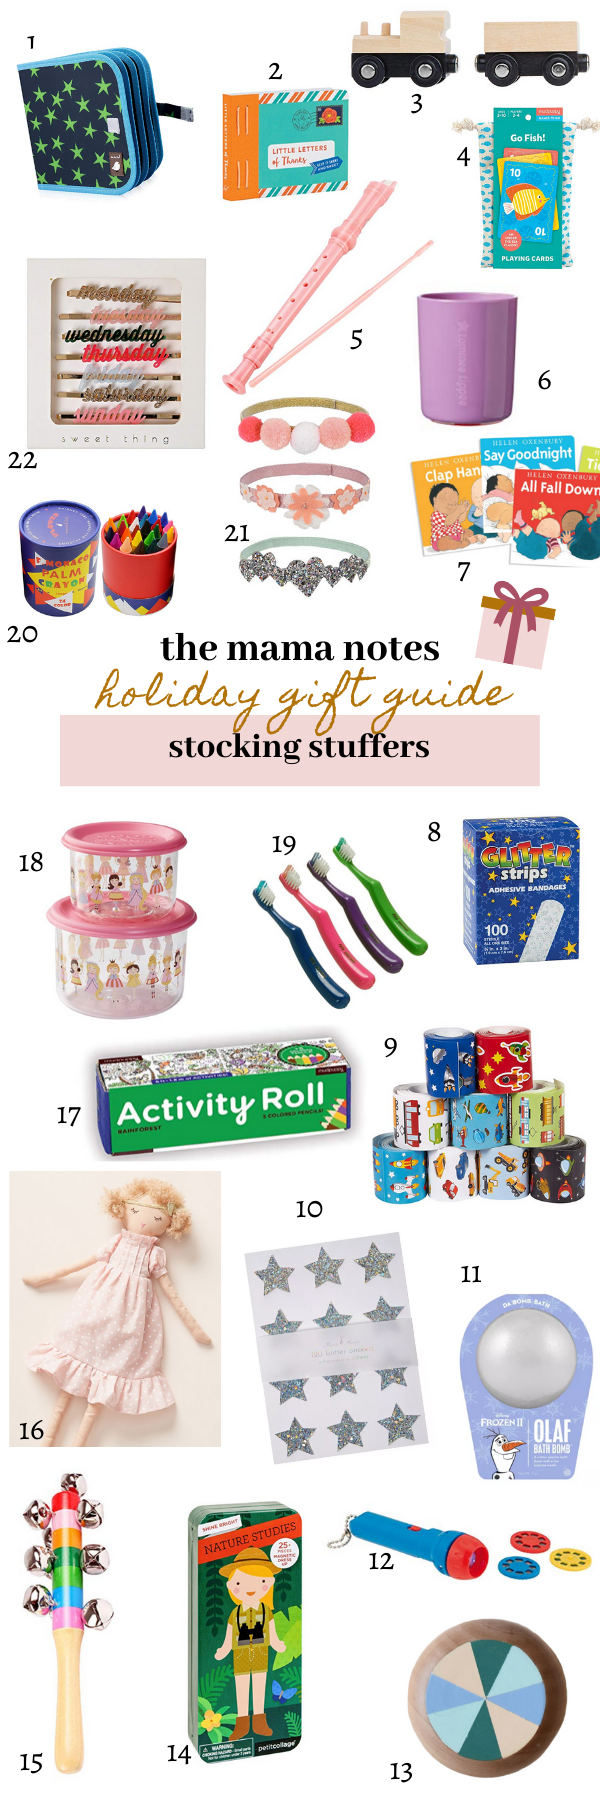 The Best Stocking Stuffers For Toddlers - The Mama Notes